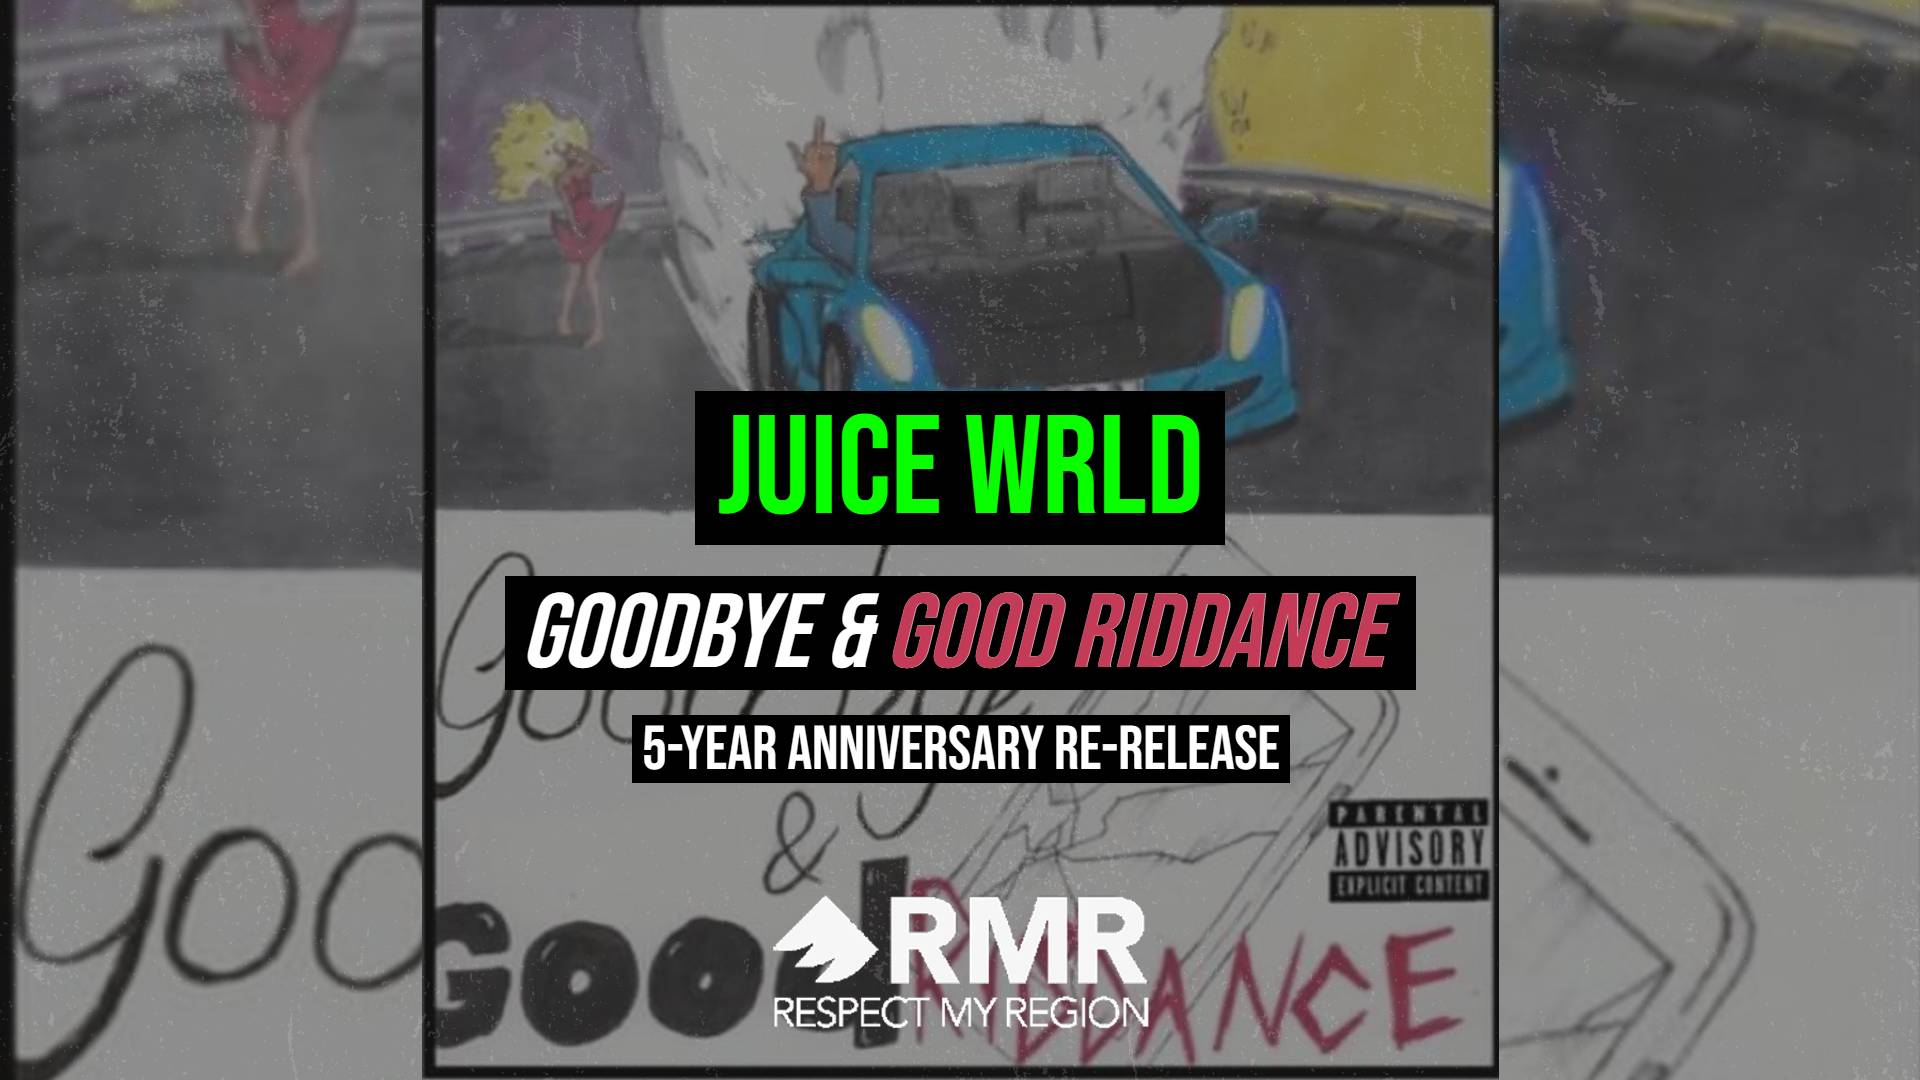 Juice WRLD is Celebrated with 5-Year Anniversary Re-Release of "Goodbye & Good Riddance"